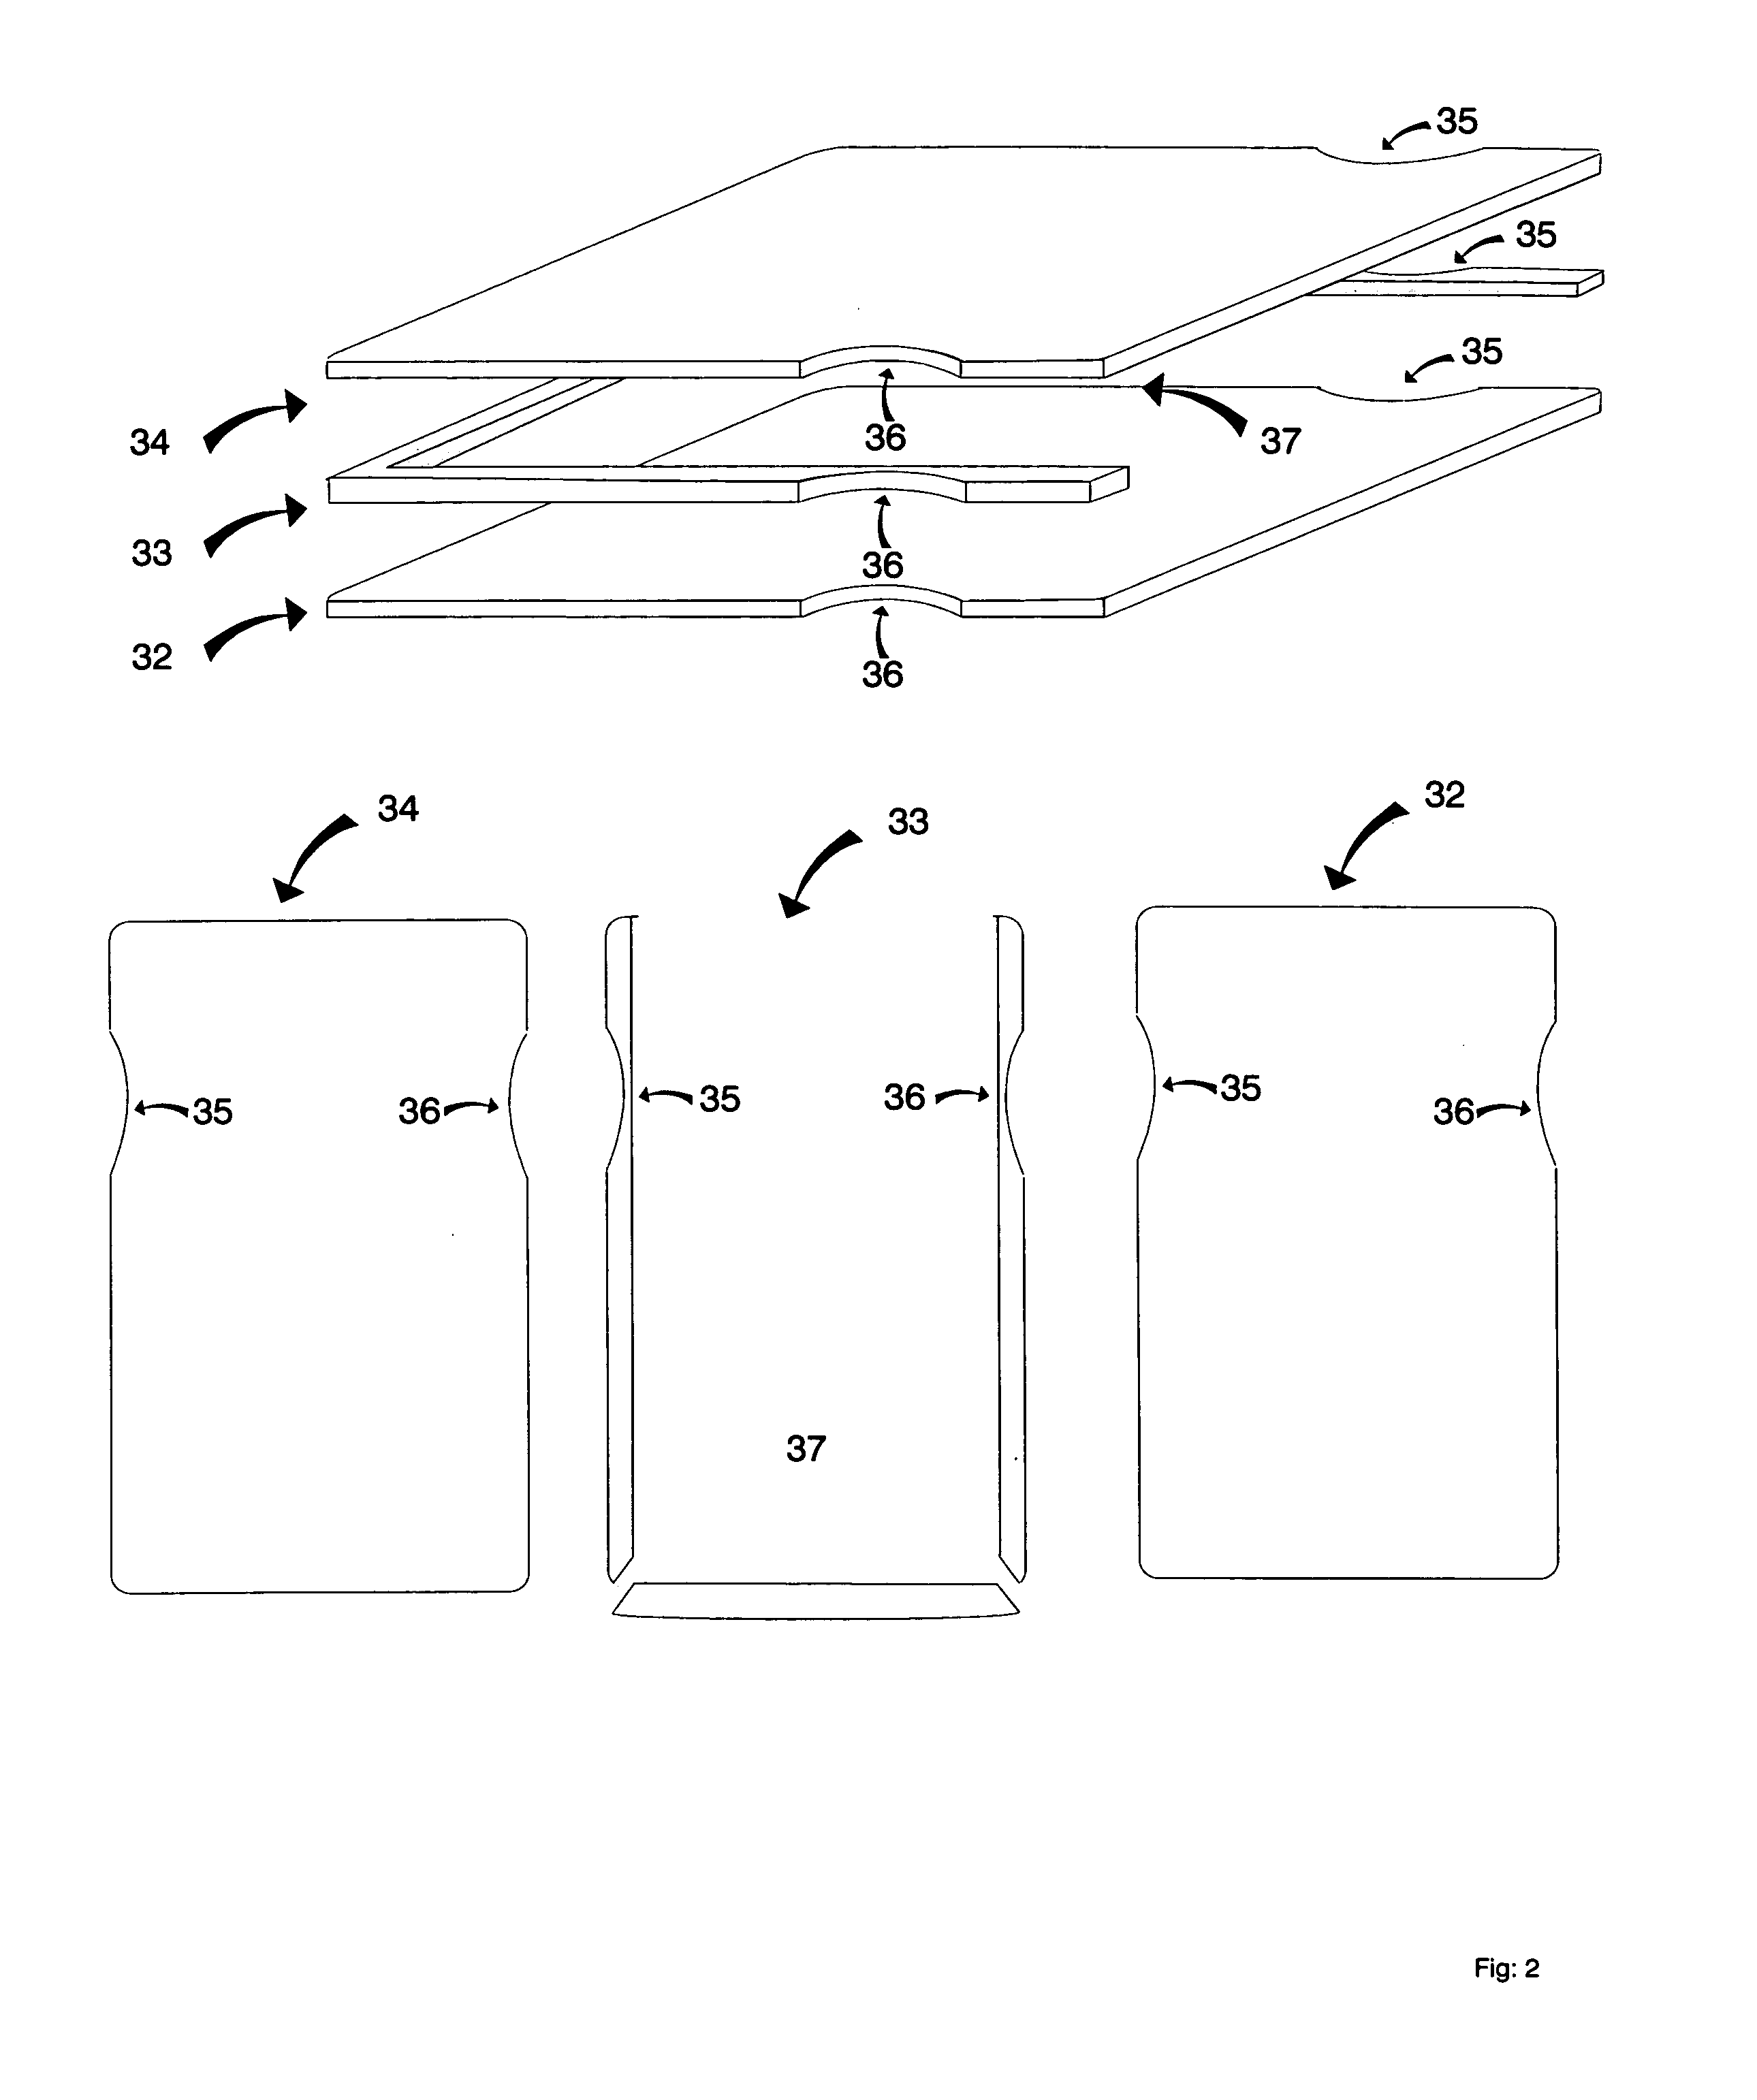 Apparatus for blending base pigments into composite colors and method for making same